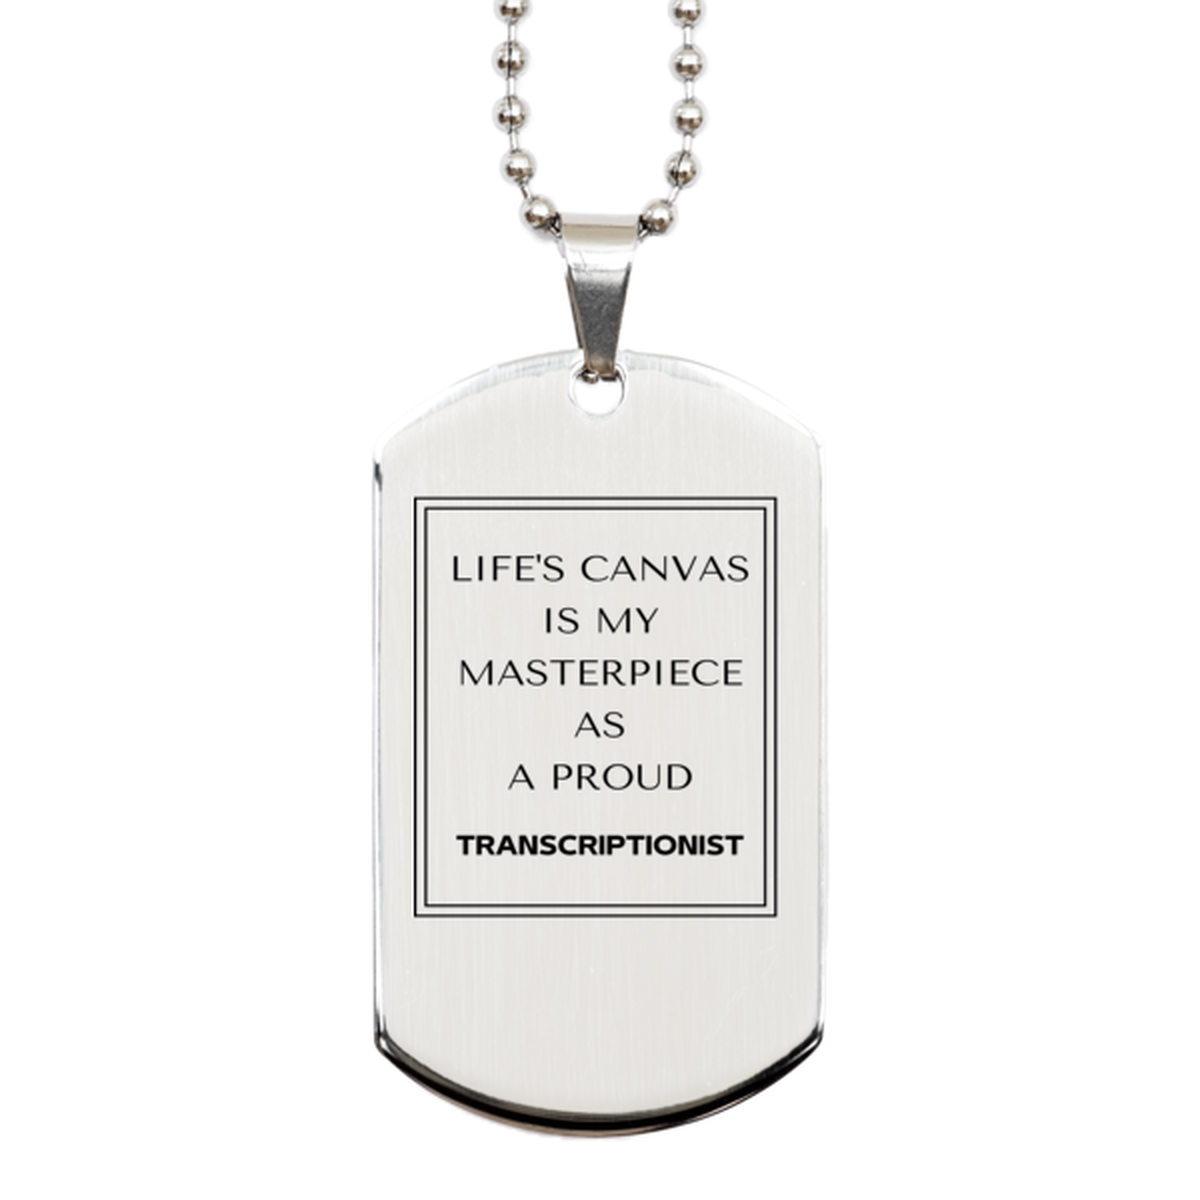 Proud Transcriptionist Gifts, Life's canvas is my masterpiece, Epic Birthday Christmas Unique Silver Dog Tag For Transcriptionist, Coworkers, Men, Women, Friends